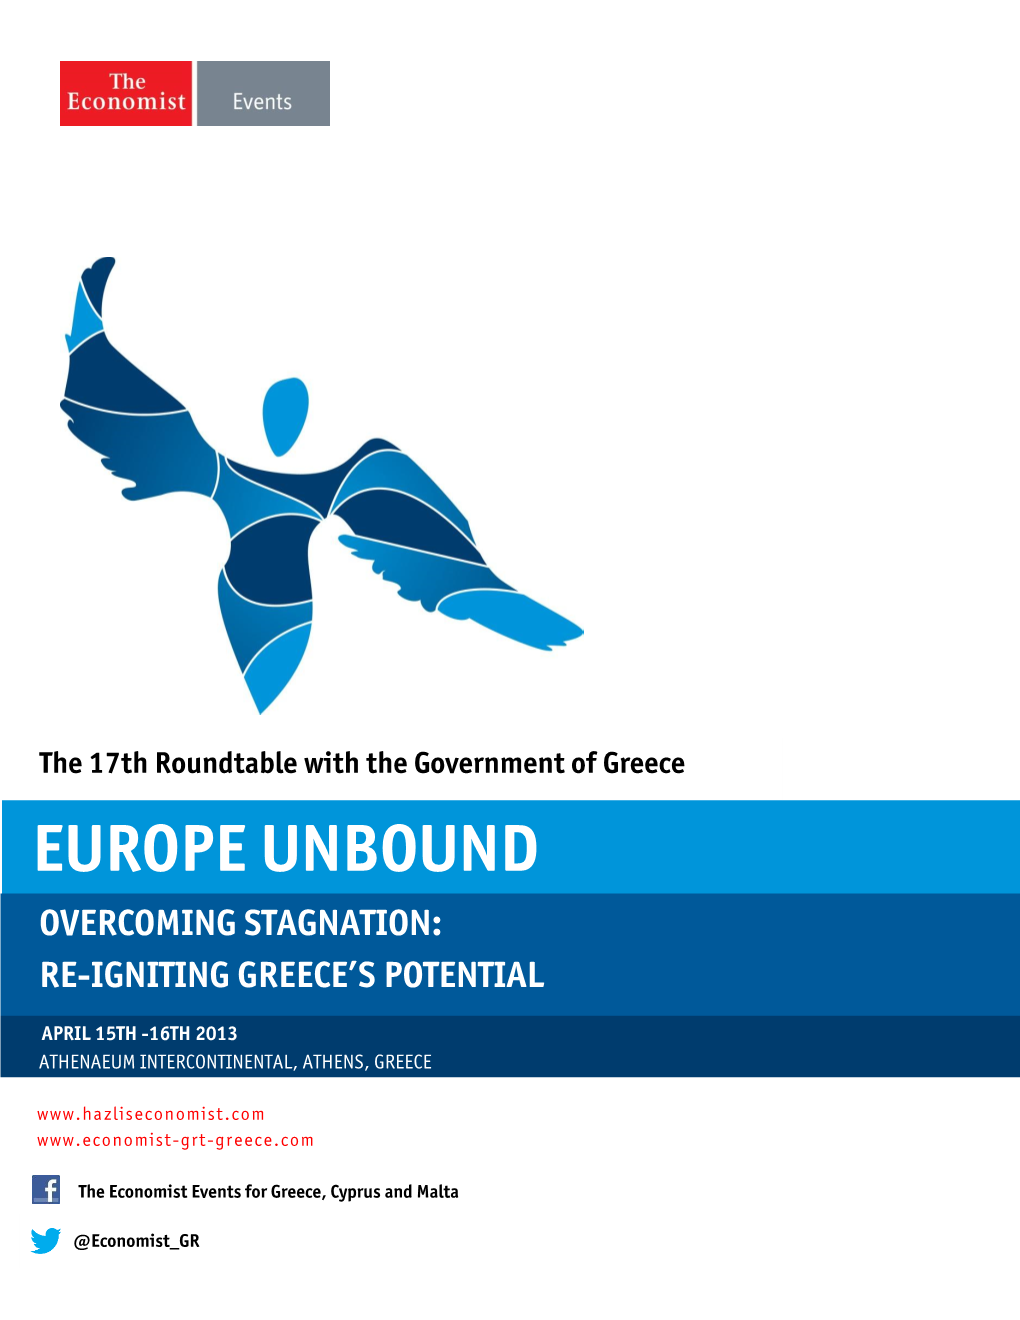 Europe Unbound Overcoming Stagnation